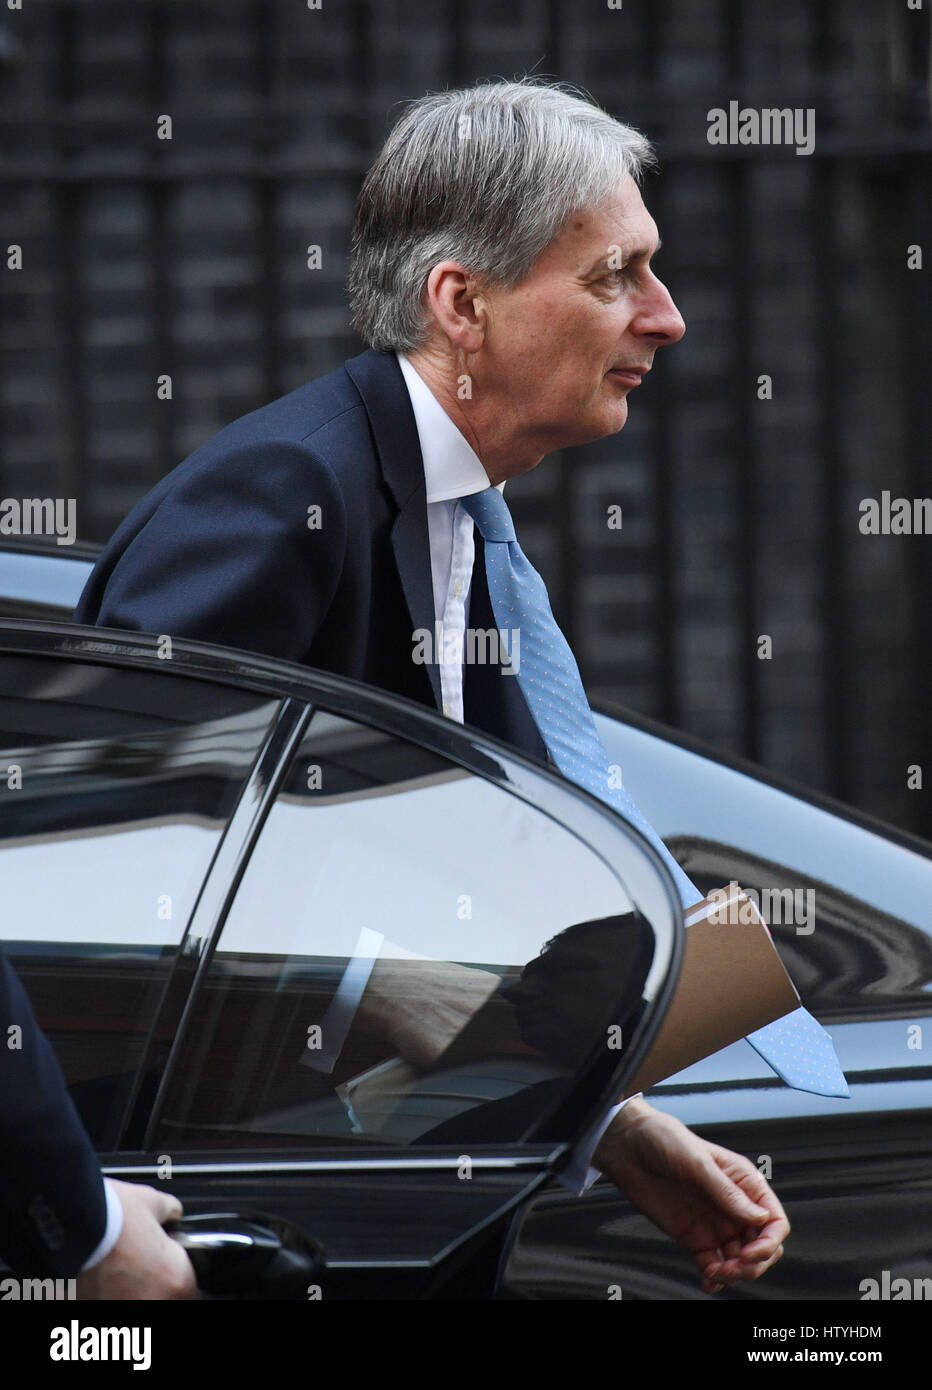 Chancellor Philip Hammond arrives back in Downing Street, London, after he committed a dramatic U-turn over his planned Budget hike in National Insurance Contributions (NICs) for the self-employed. Stock Photo